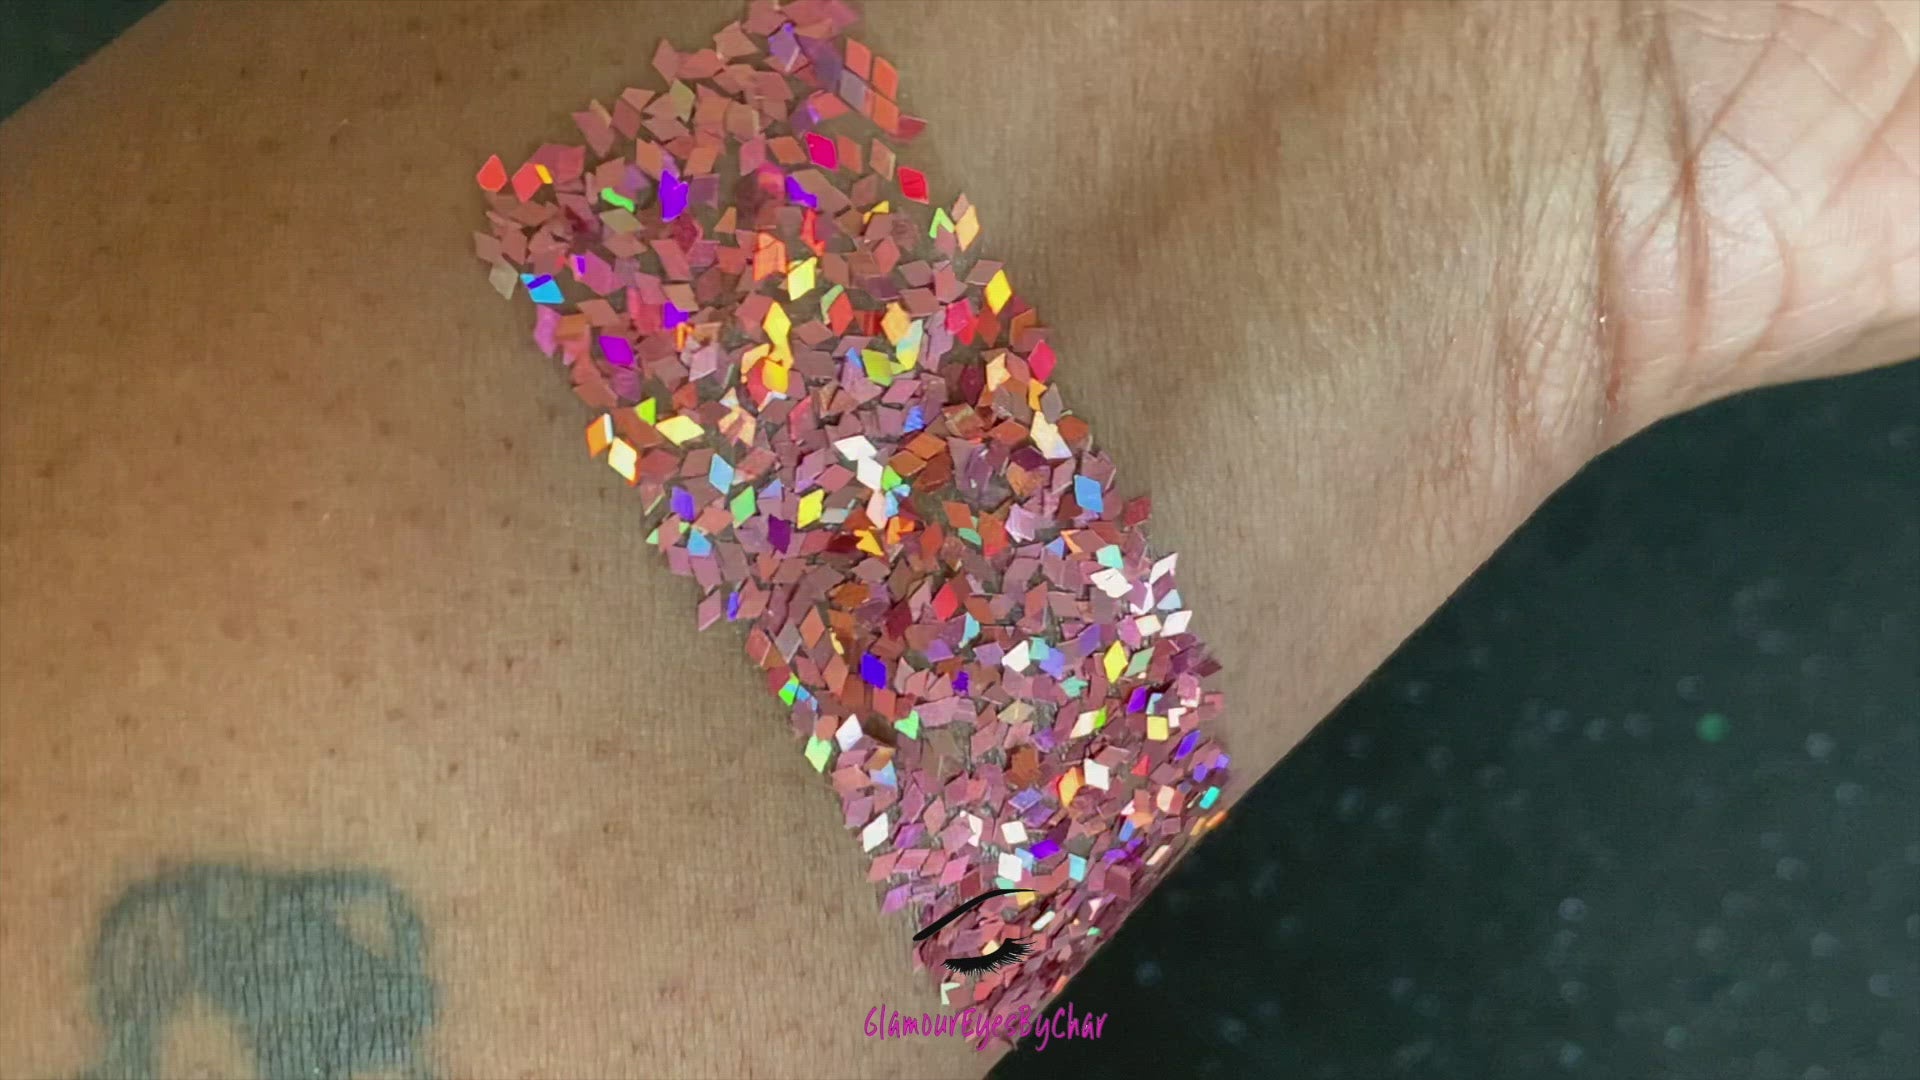 This glitter is called Rose Pink Diamonds and is part of the shaped glitters collection. It consists of rose pink diamond glitter with a dazzling holographic sparkle. Rose Pink Diamonds is perfect for body and nail art or DIY projects. Comes in 5g jars only.  